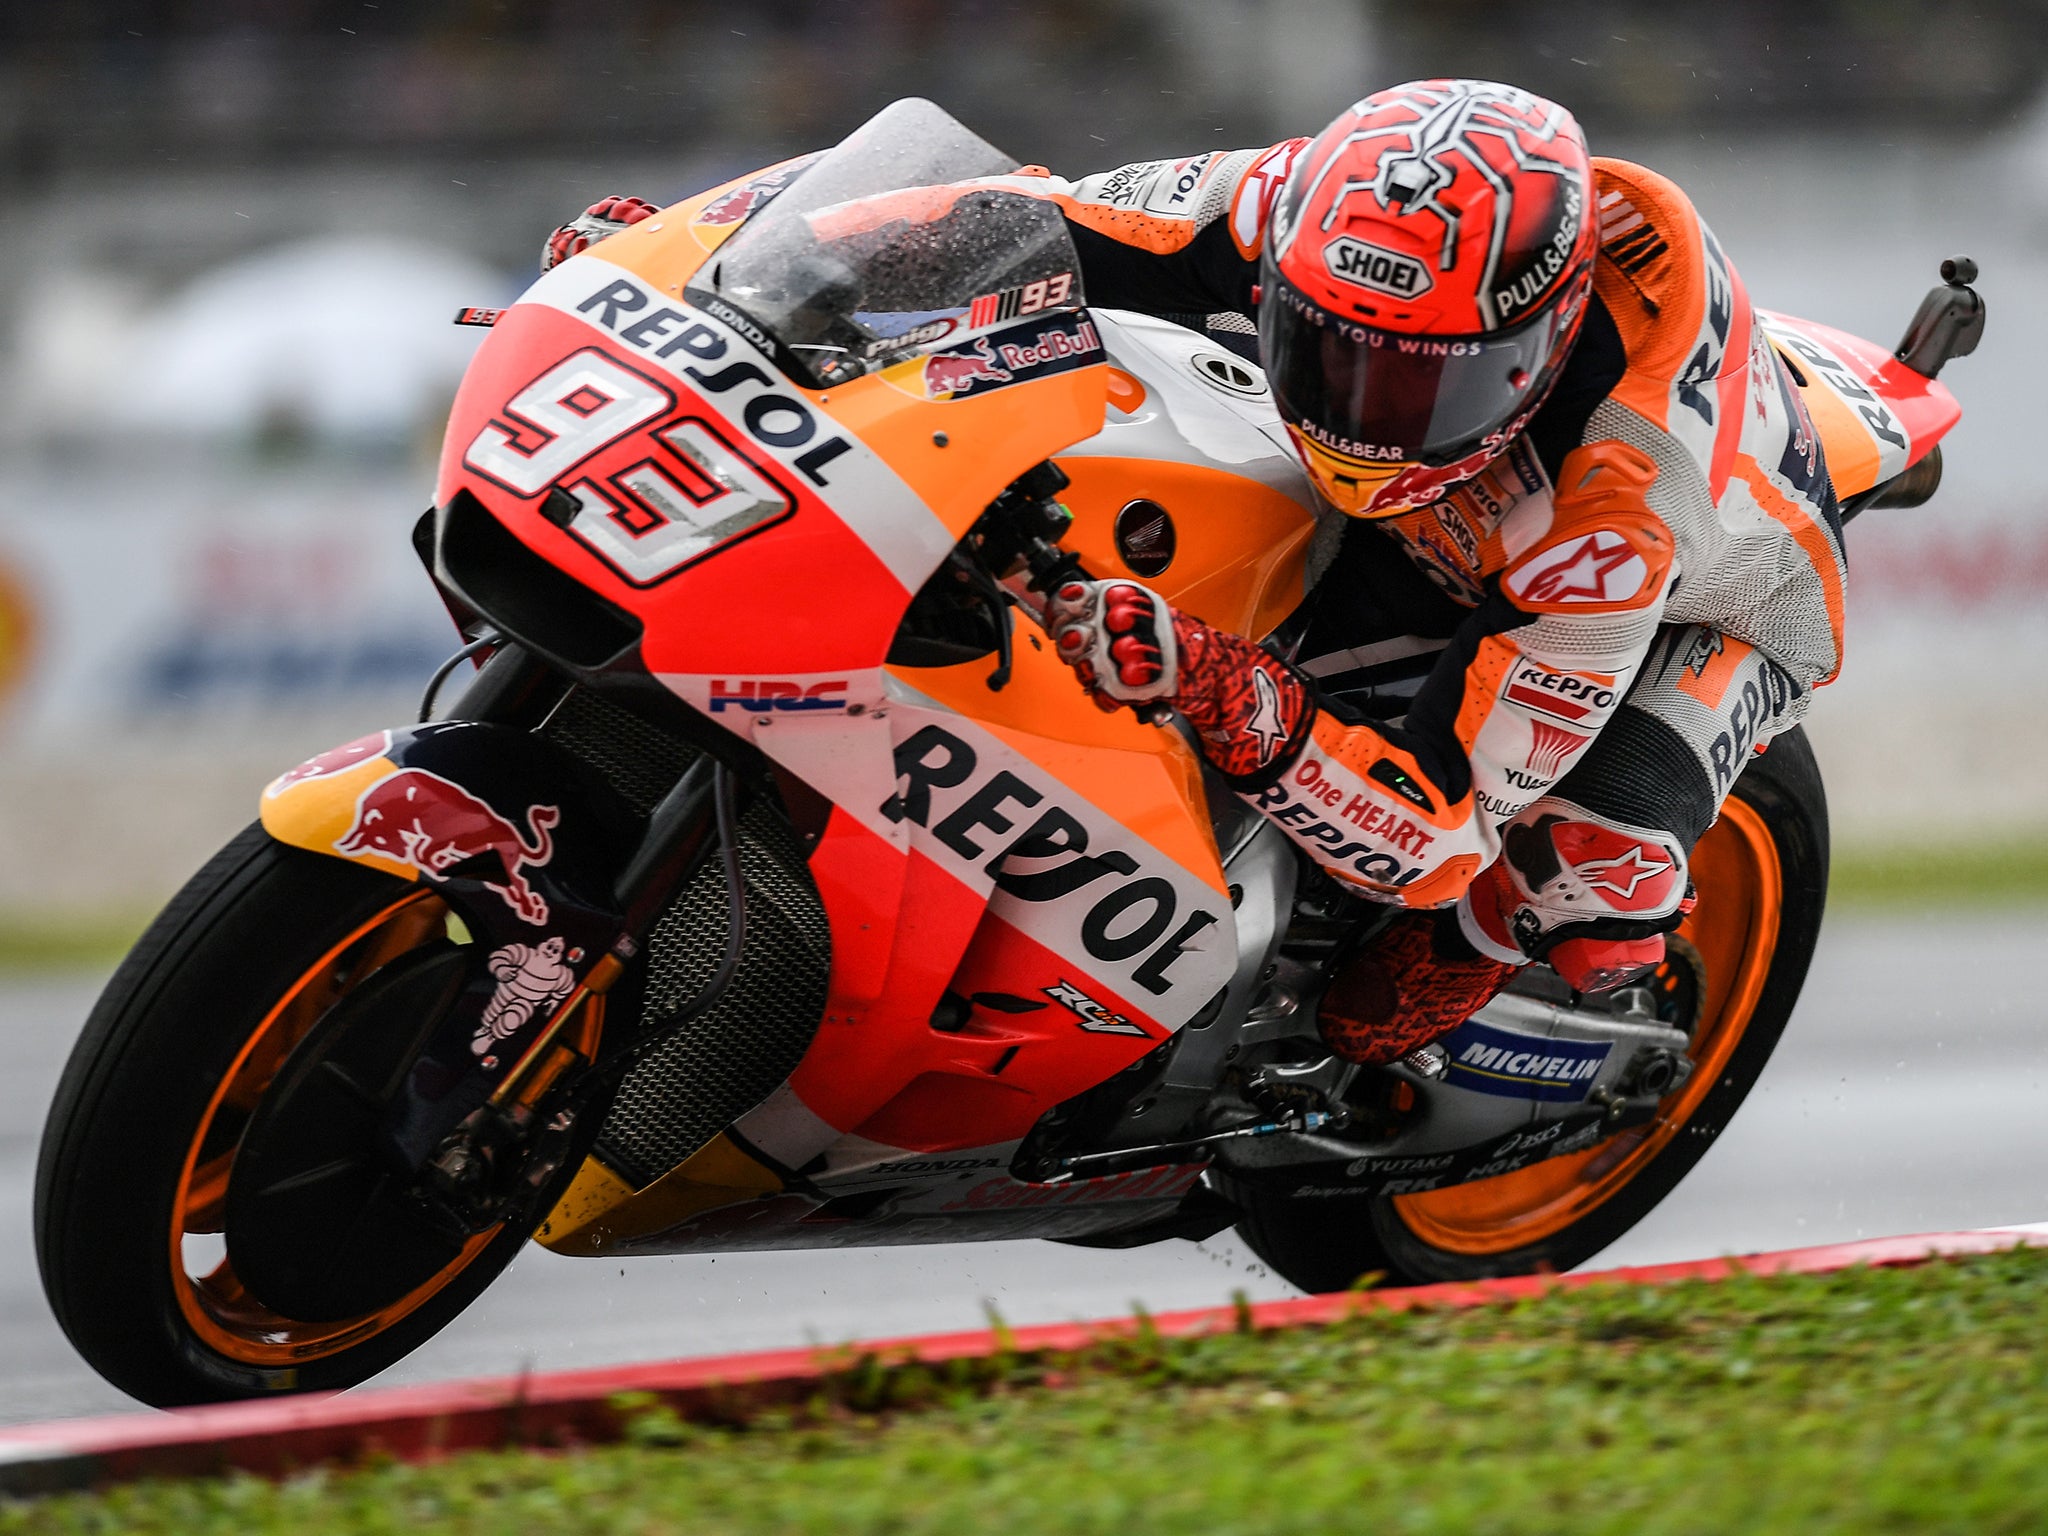 Marc Marquez remains the favourite for the title as he needs just five points in Valencia